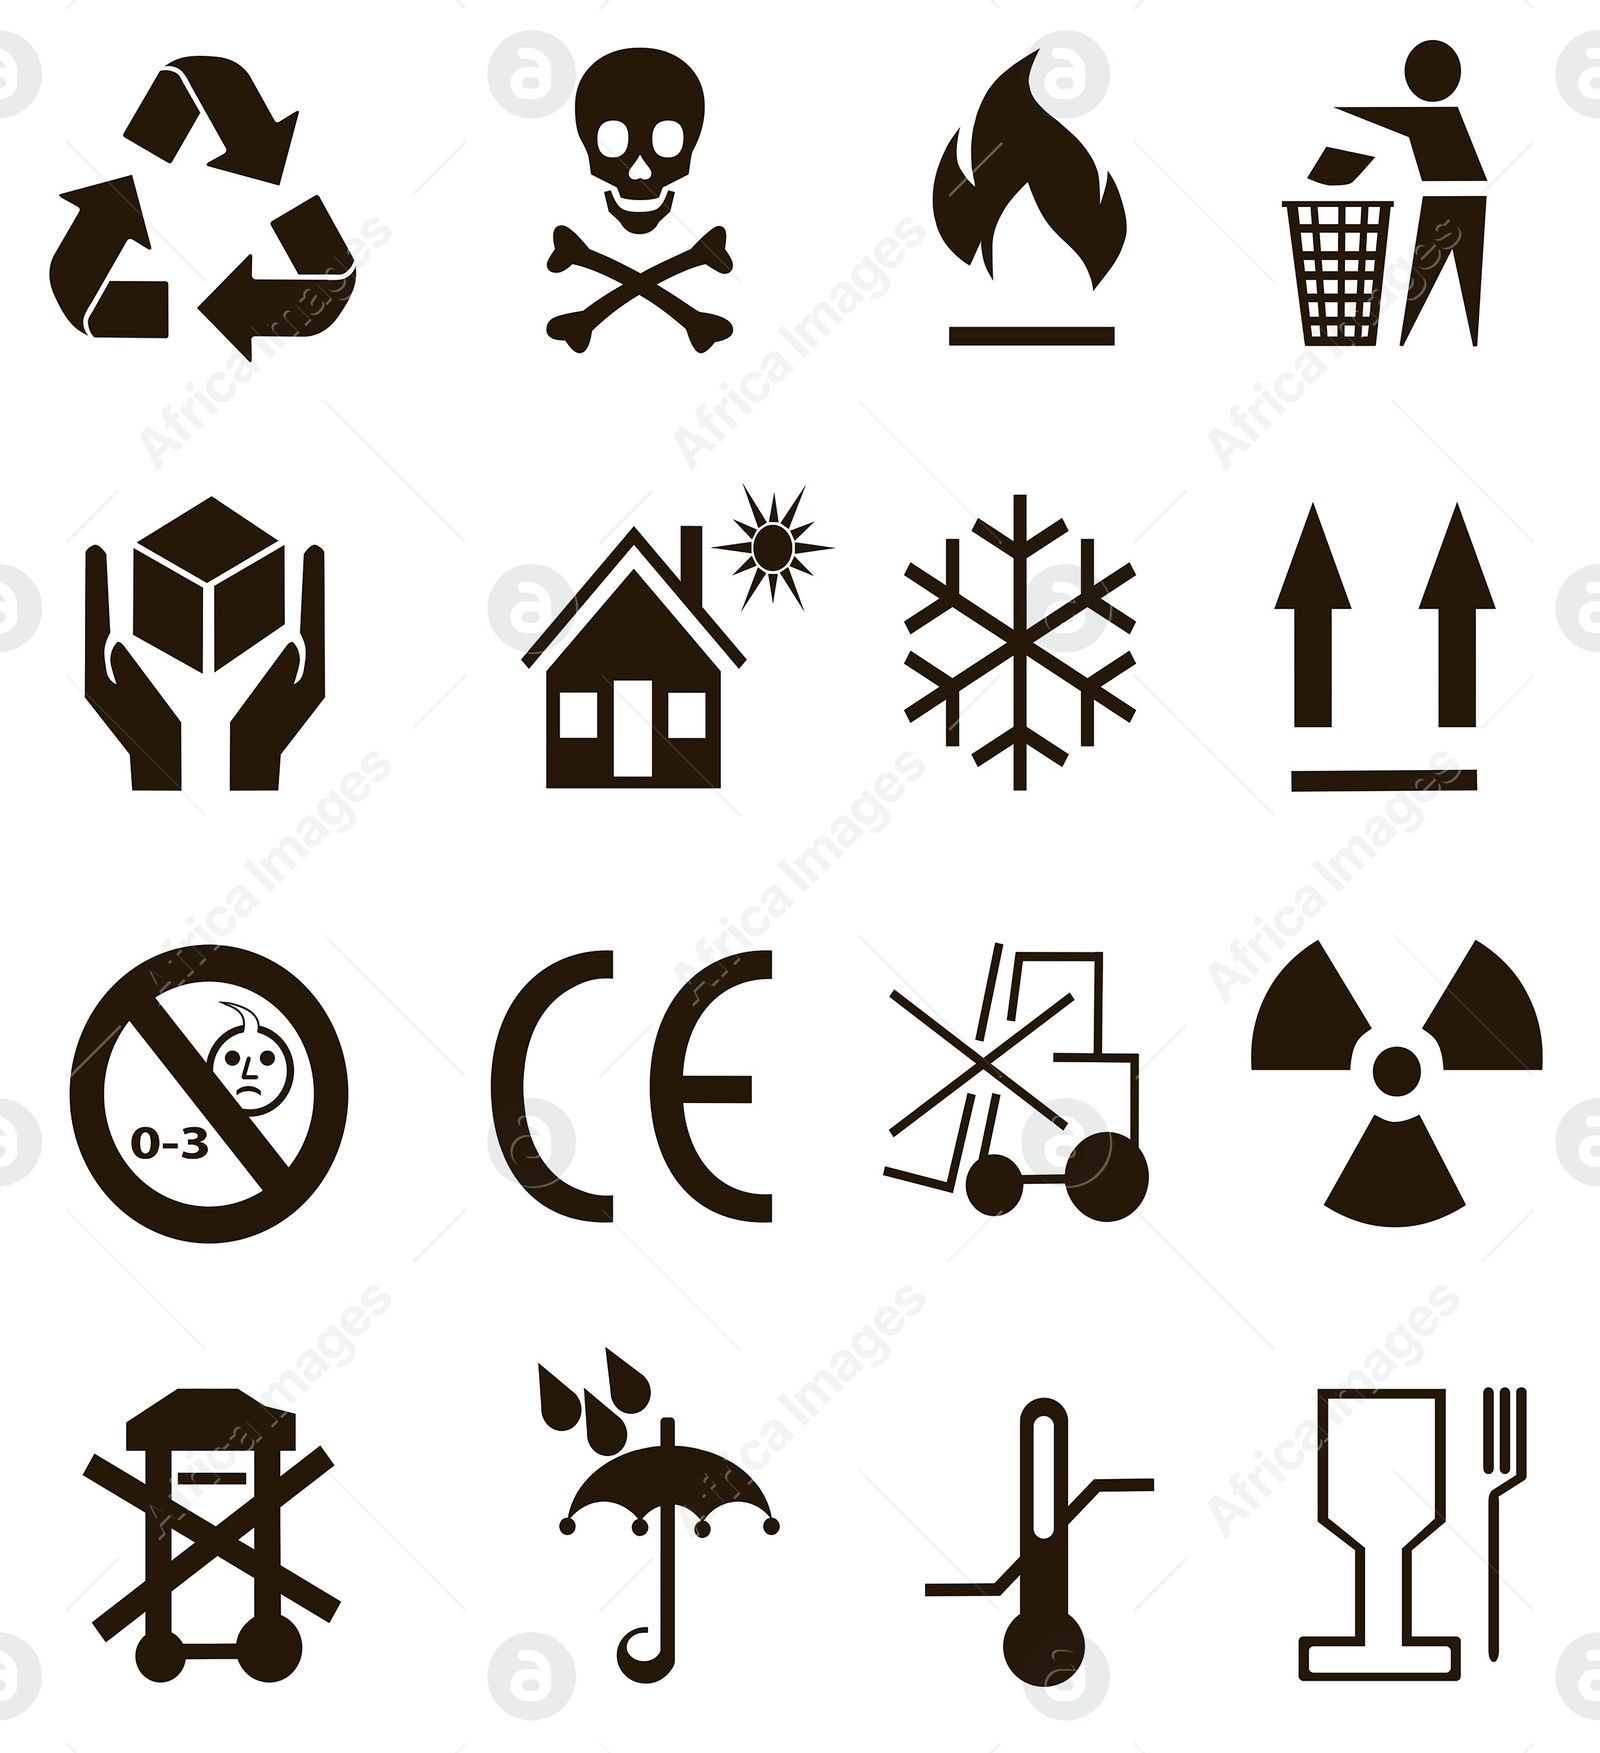 Image of Illustration of different packaging symbols on white background 